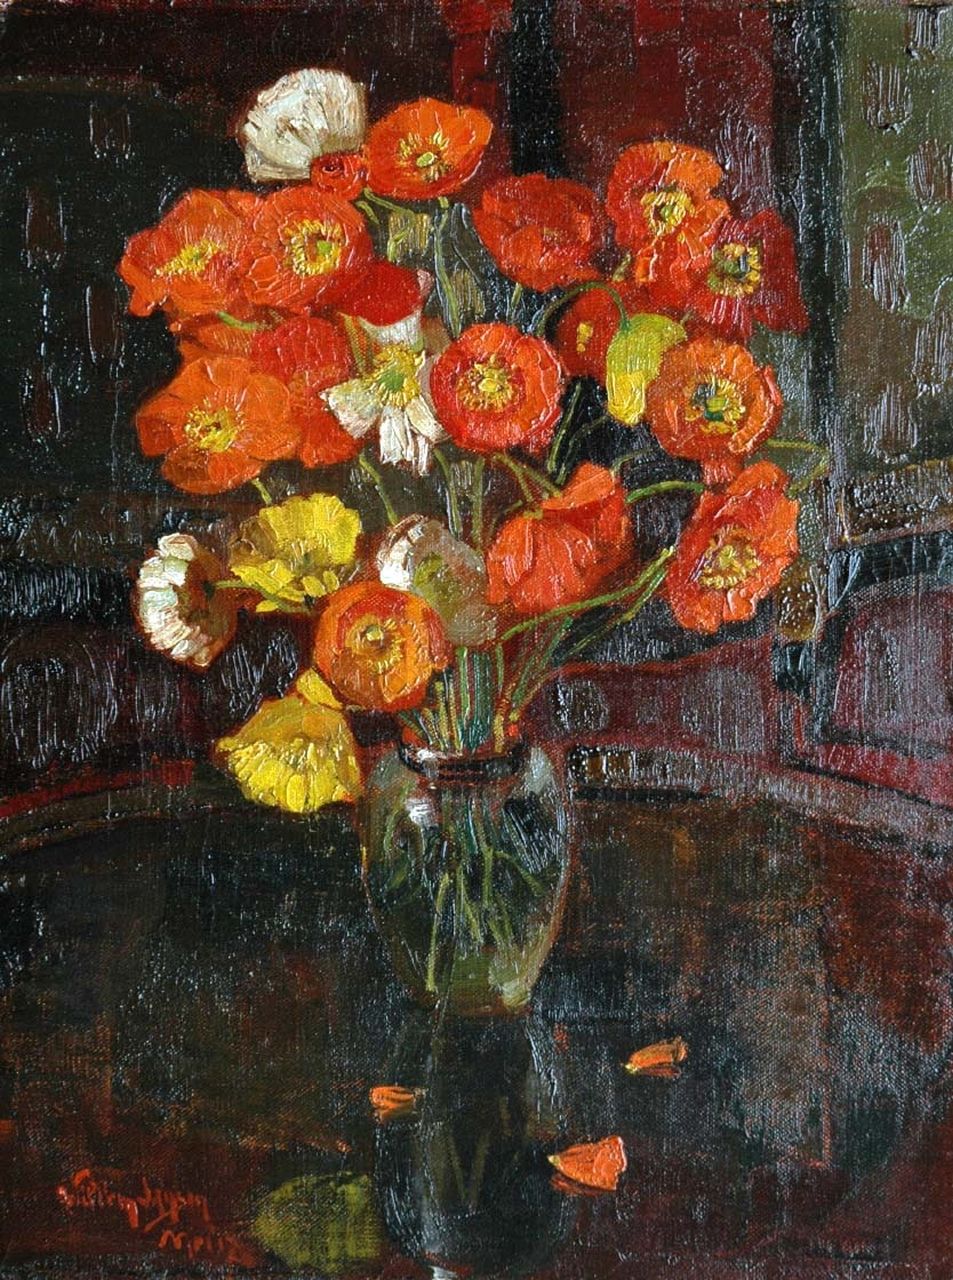 Jansen W.  | Willem Jansen, A still life with poppies, oil on canvas 44.7 x 34.5 cm, signed l.l. and painted in May '17